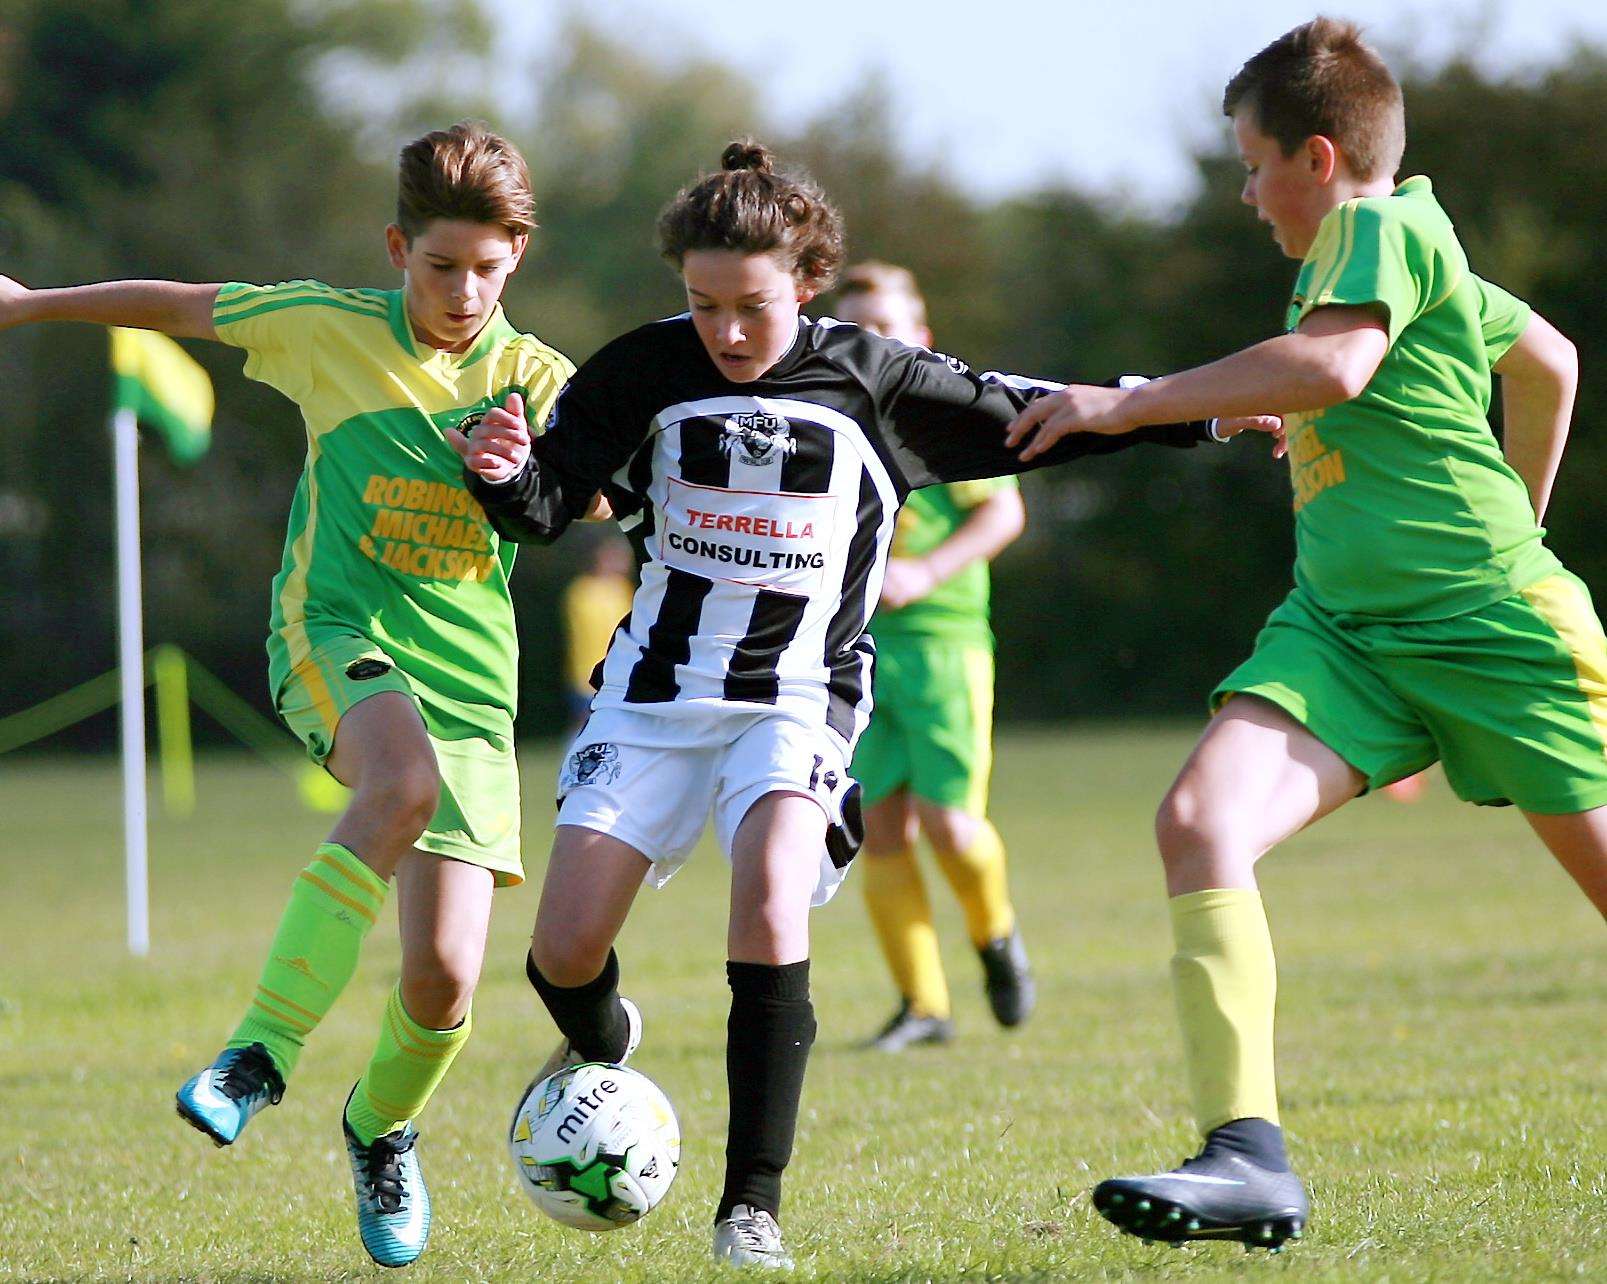 Cliffe Woods Colts (green/yellow) up against Milton & Fulston United in Under-12 Division 2 Picture: Phil Lee